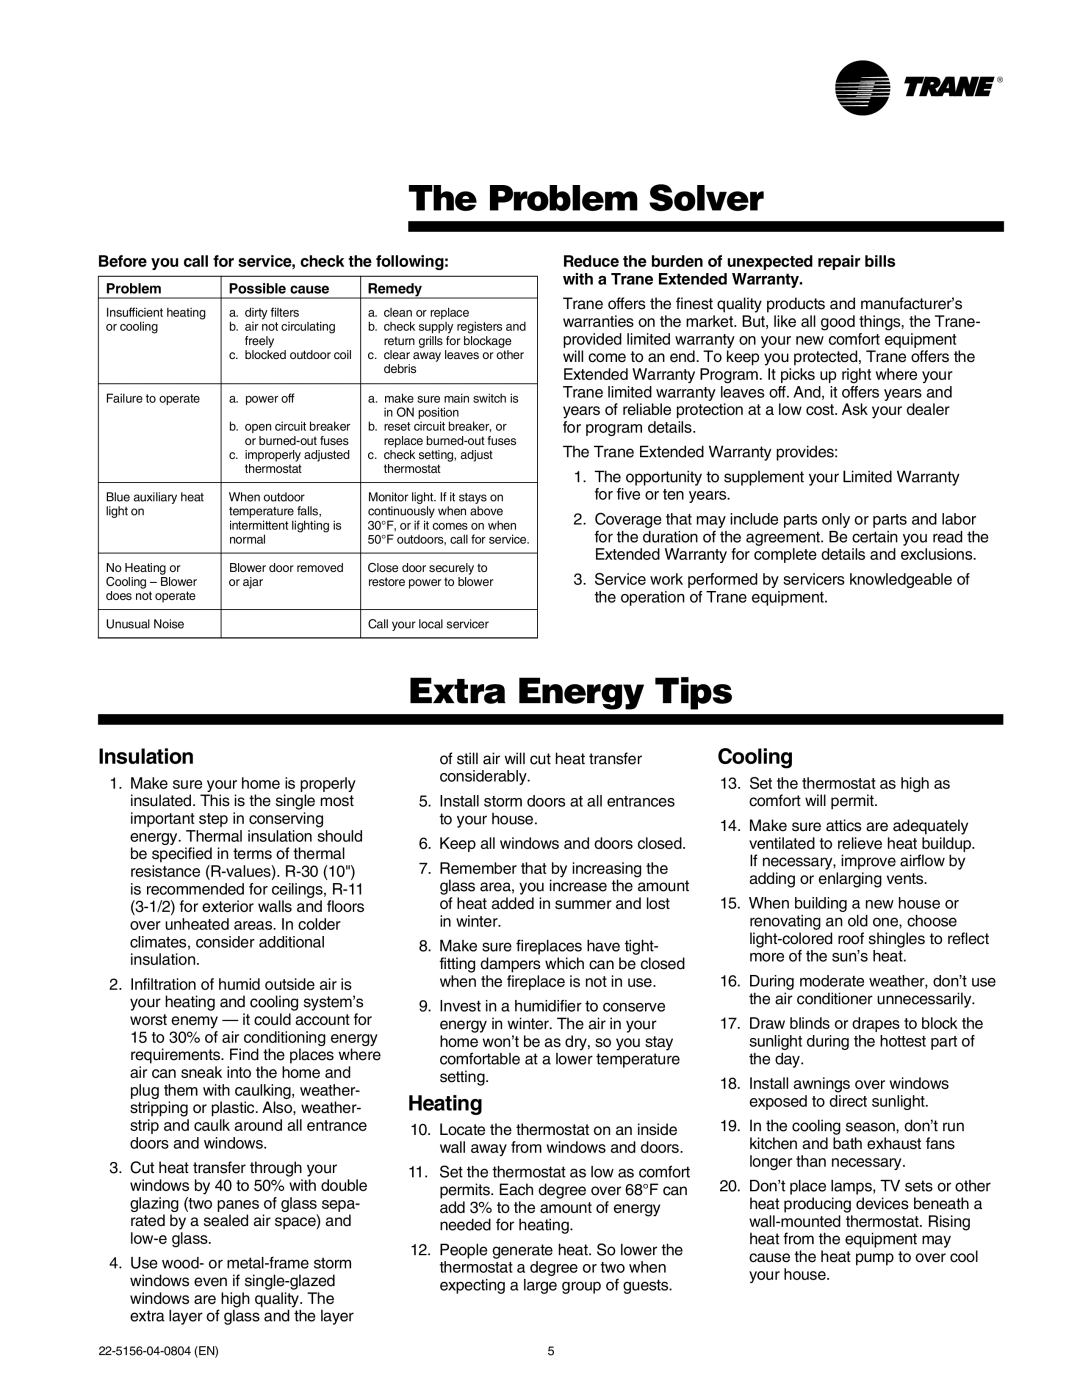 Trane 22-5156-04-0804 manual The Problem Solver, Extra Energy Tips, Insulation, Heating, Cooling 